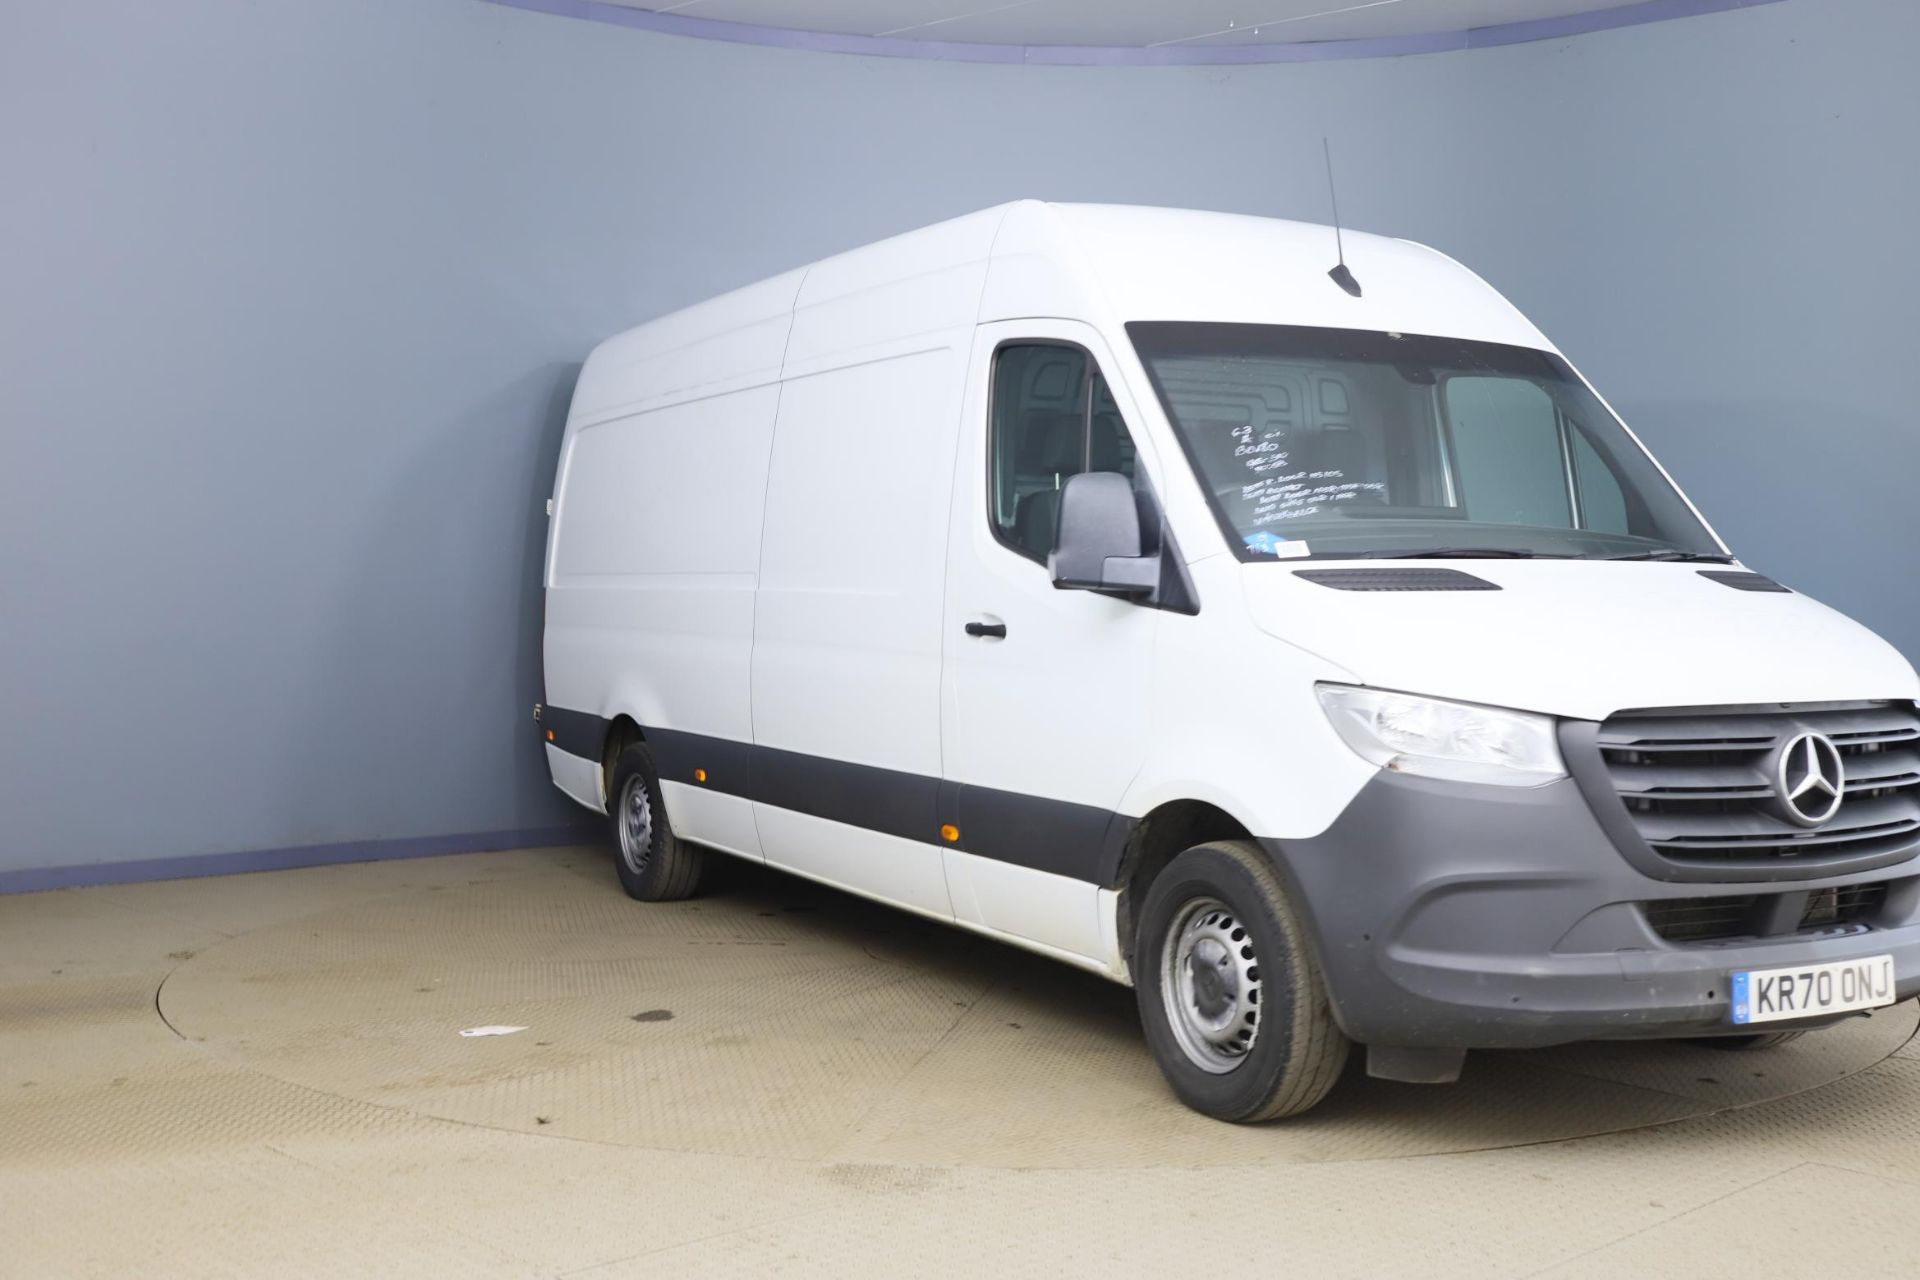 MERCEDES SPRINTER 315CDI "LWB" HIGH TOP "70 REG" 2021 MODEL - 1 Owner From New - Euro 6 - Image 4 of 12